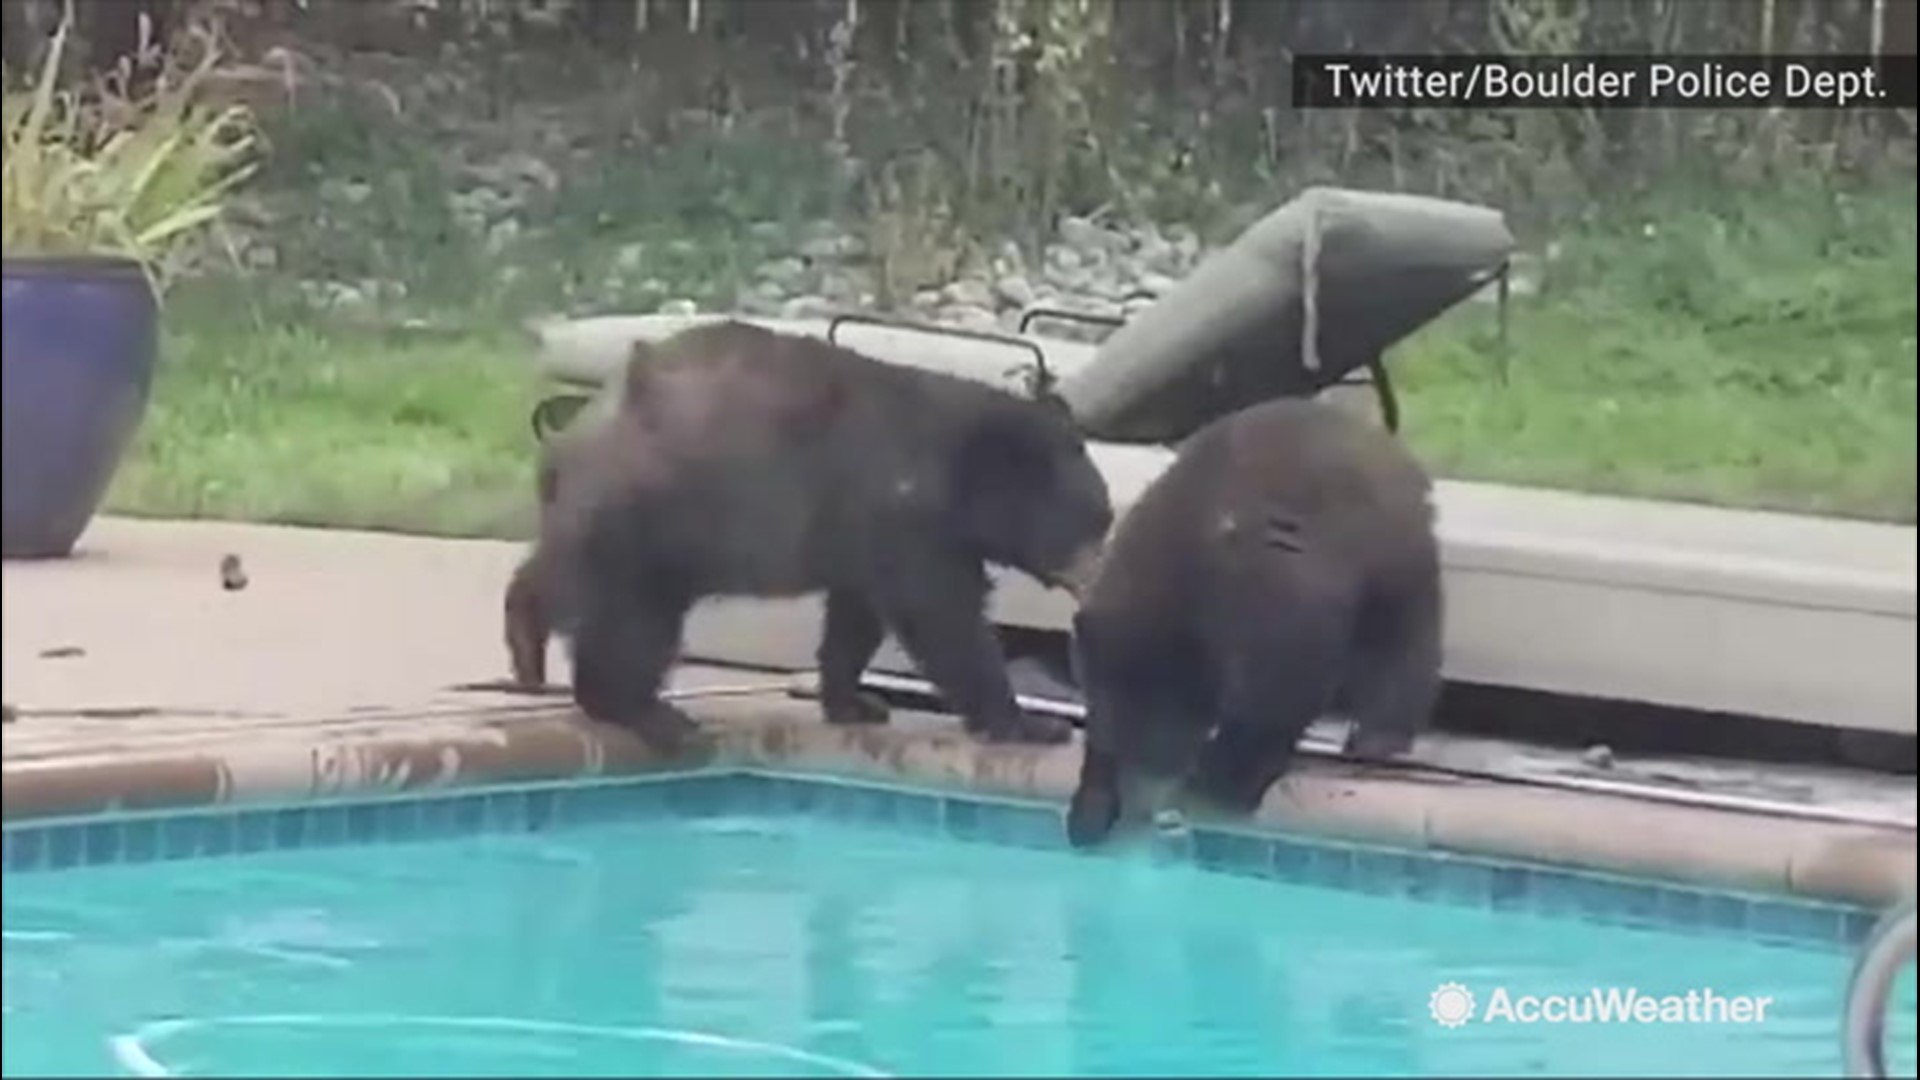 Before a snowstorm buried the city of Boulder, Colorado, on Oct. 10, it was warm enough for these bears to enjoy their own version of a swimming pool party.